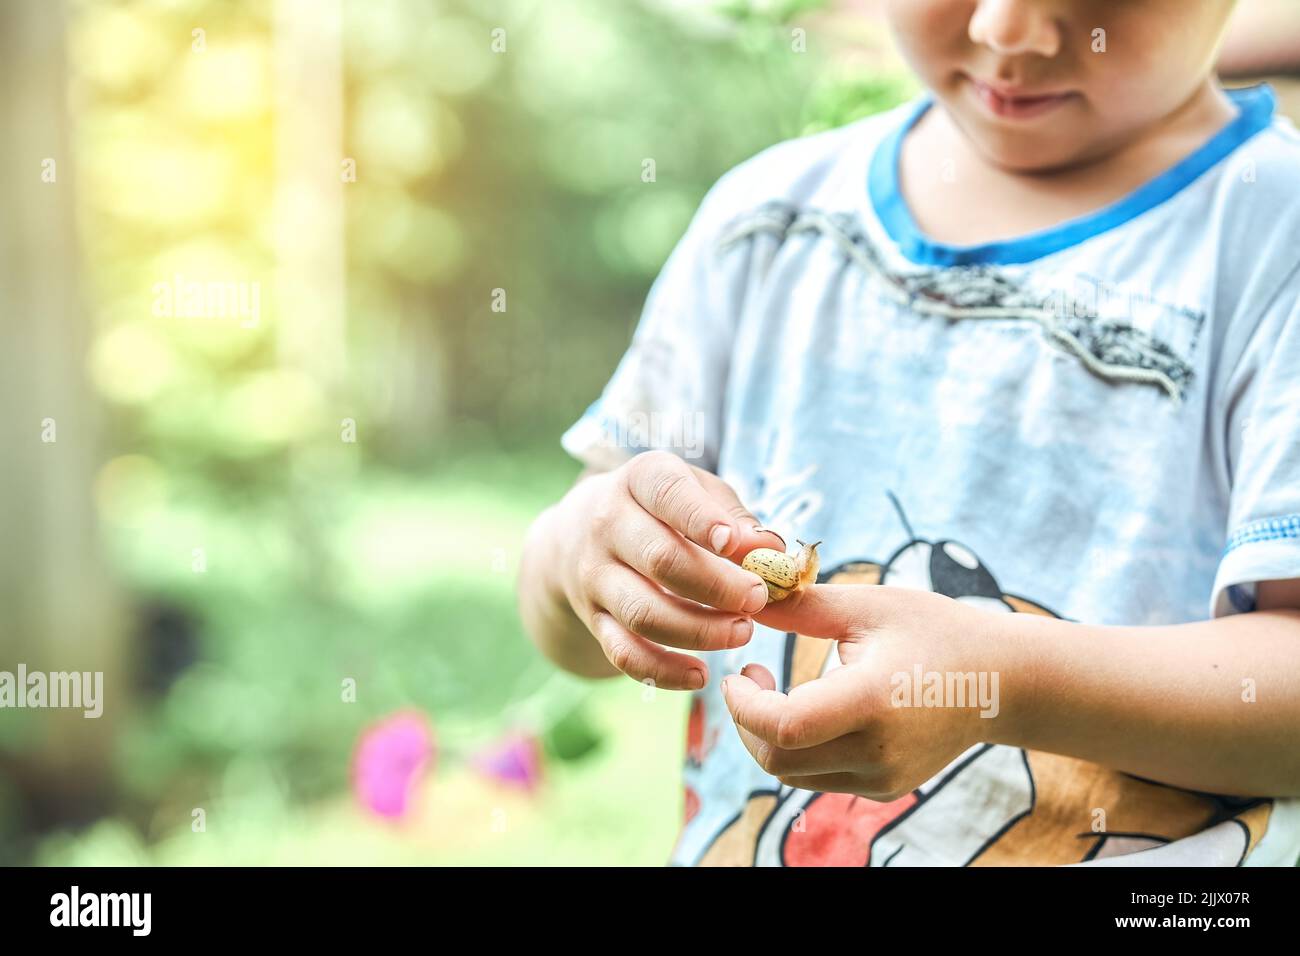 Little boy observing small green snail crawling on hand while exploring nature in summertime Stock Photo